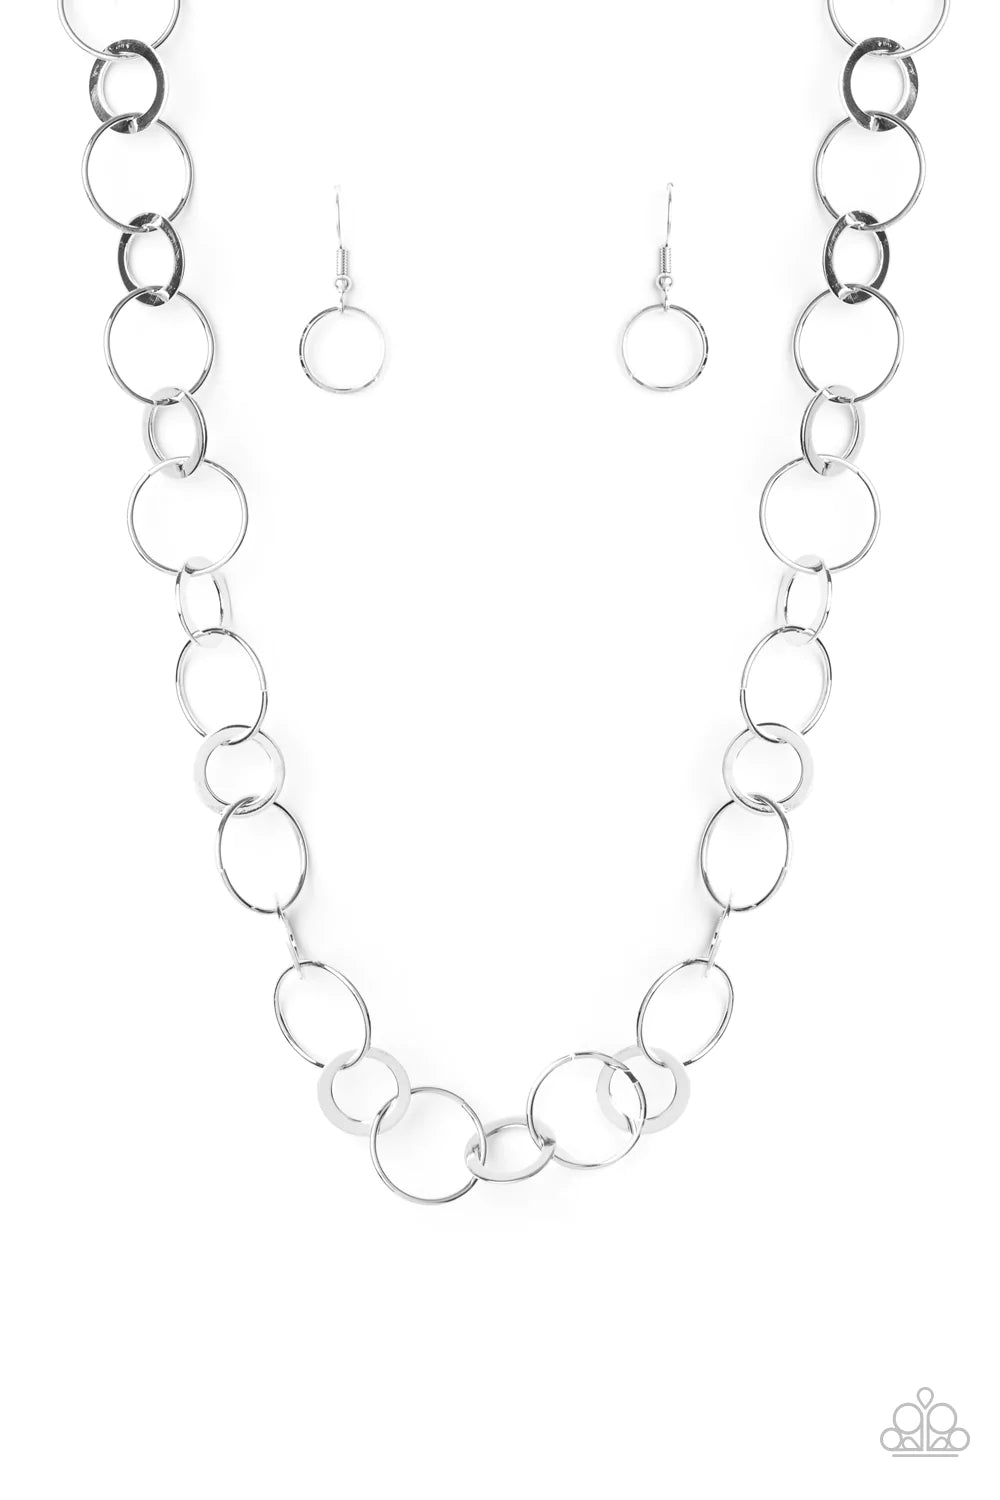 Paparazzi Accessories Revolutionary Radiance - Silver Dainty silver hoops and rings delicately link into a chic chain, creating simplistic shimmer below the collar. Features an adjustable clasp closure. Sold as one individual necklace. Includes one pair o